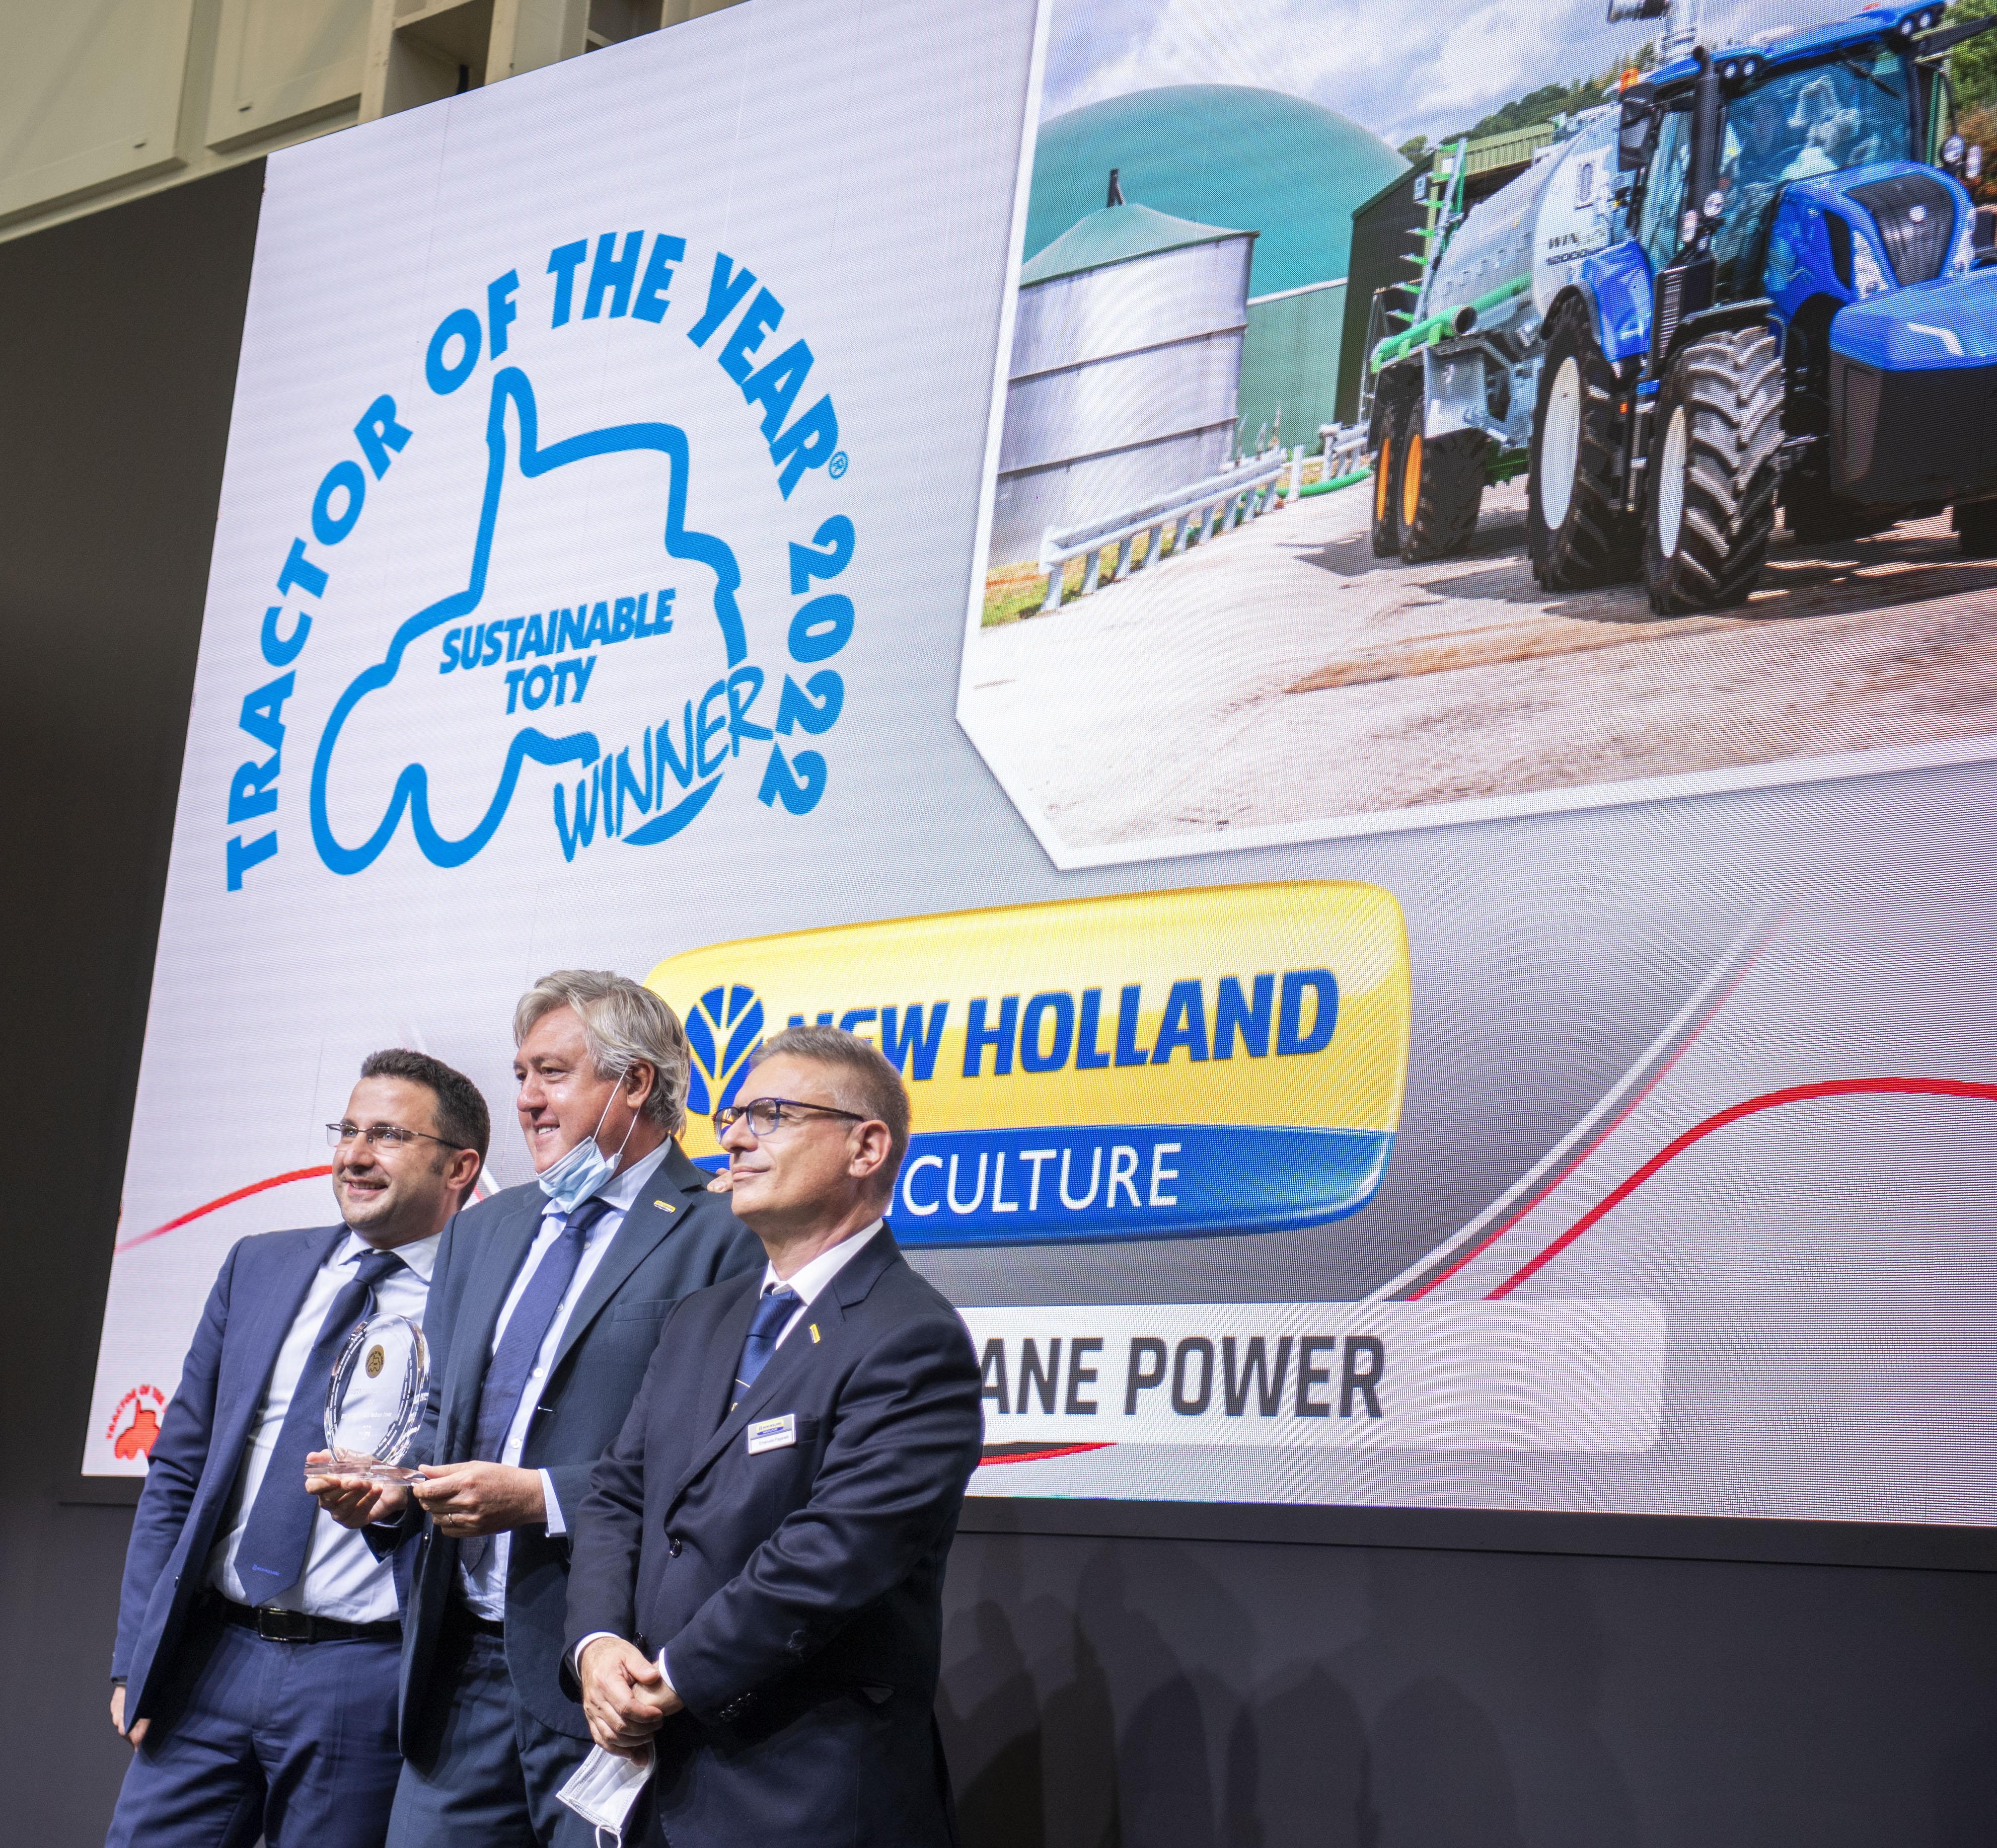 The Sustainable Tractor of the Year Award is the culmination of New Holland’s pioneering work on the use of alternative fuels and a significant step forward on the path to decarbonizing agriculture.